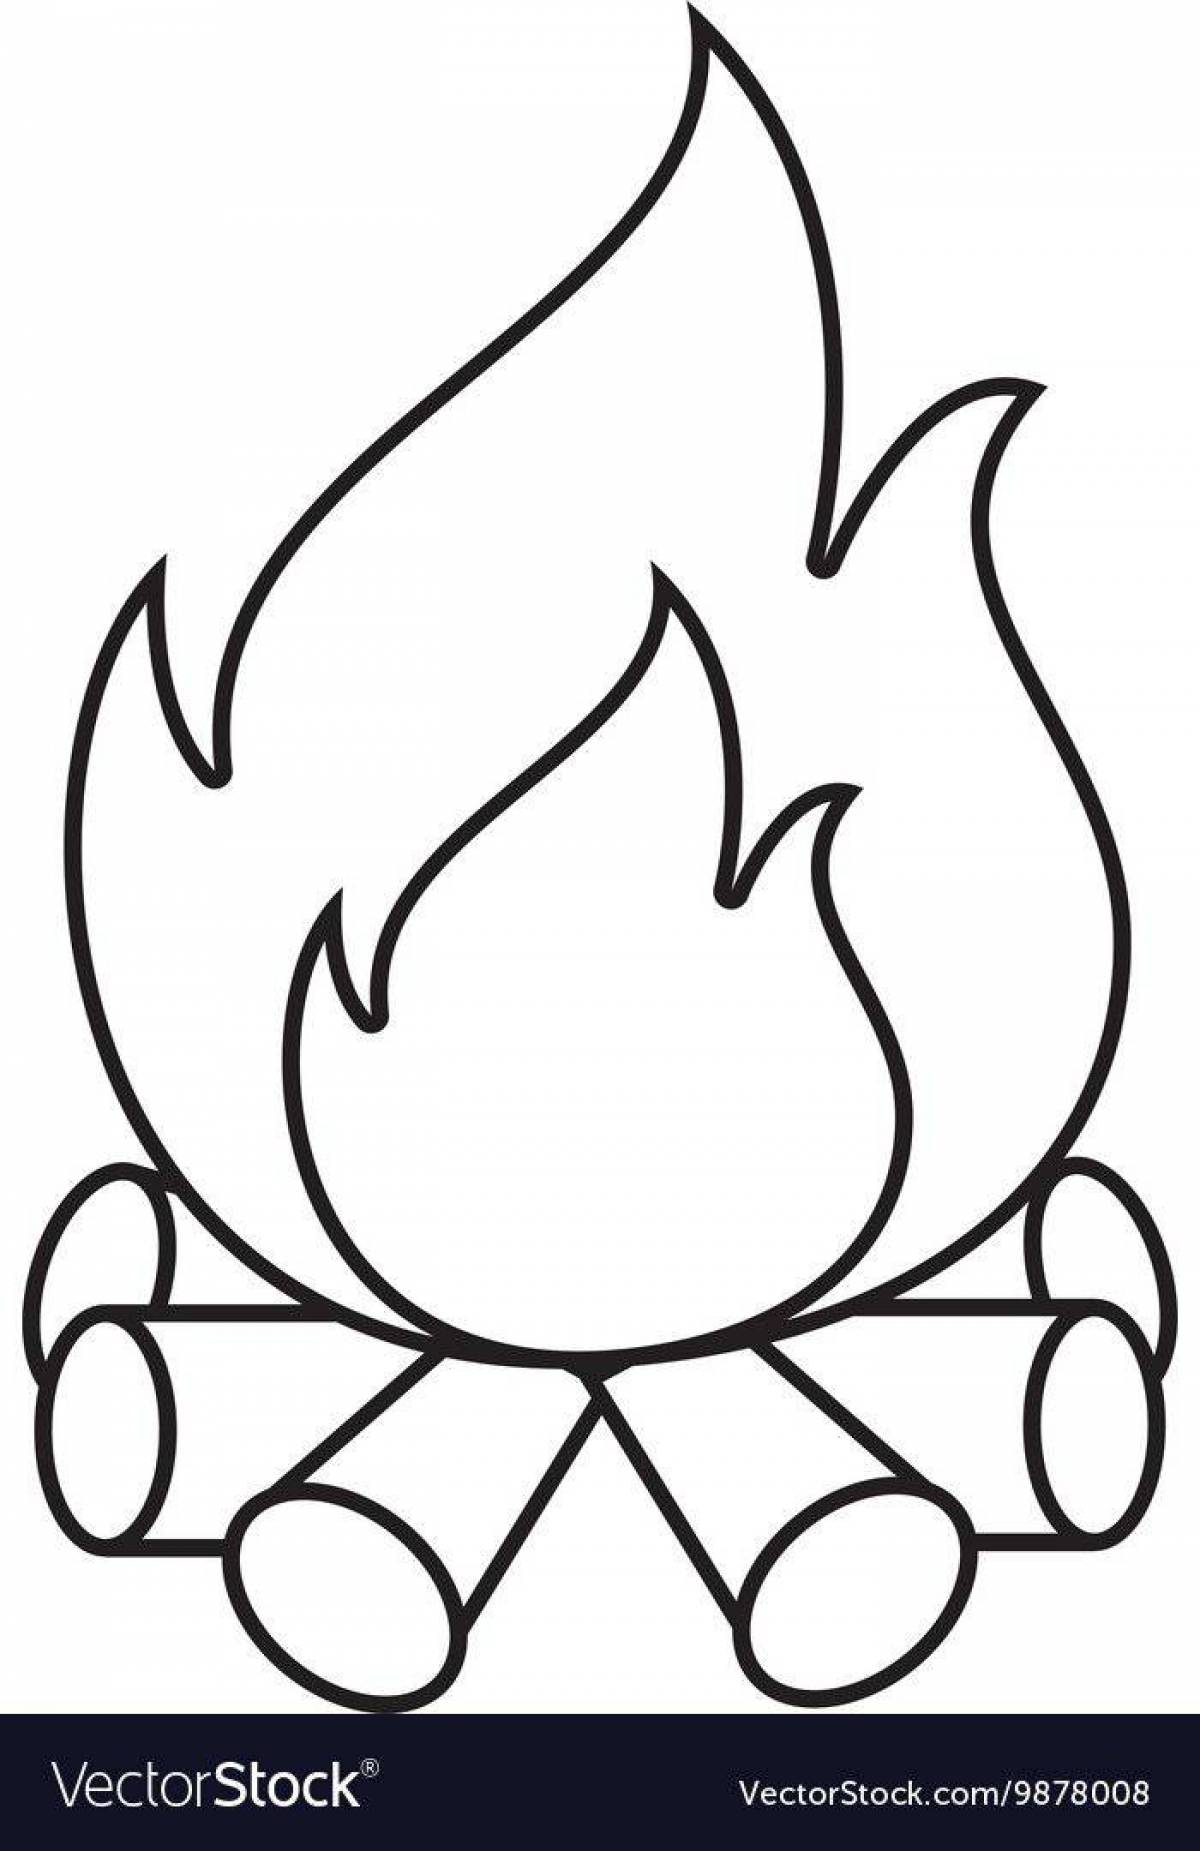 Fun fire coloring for kids